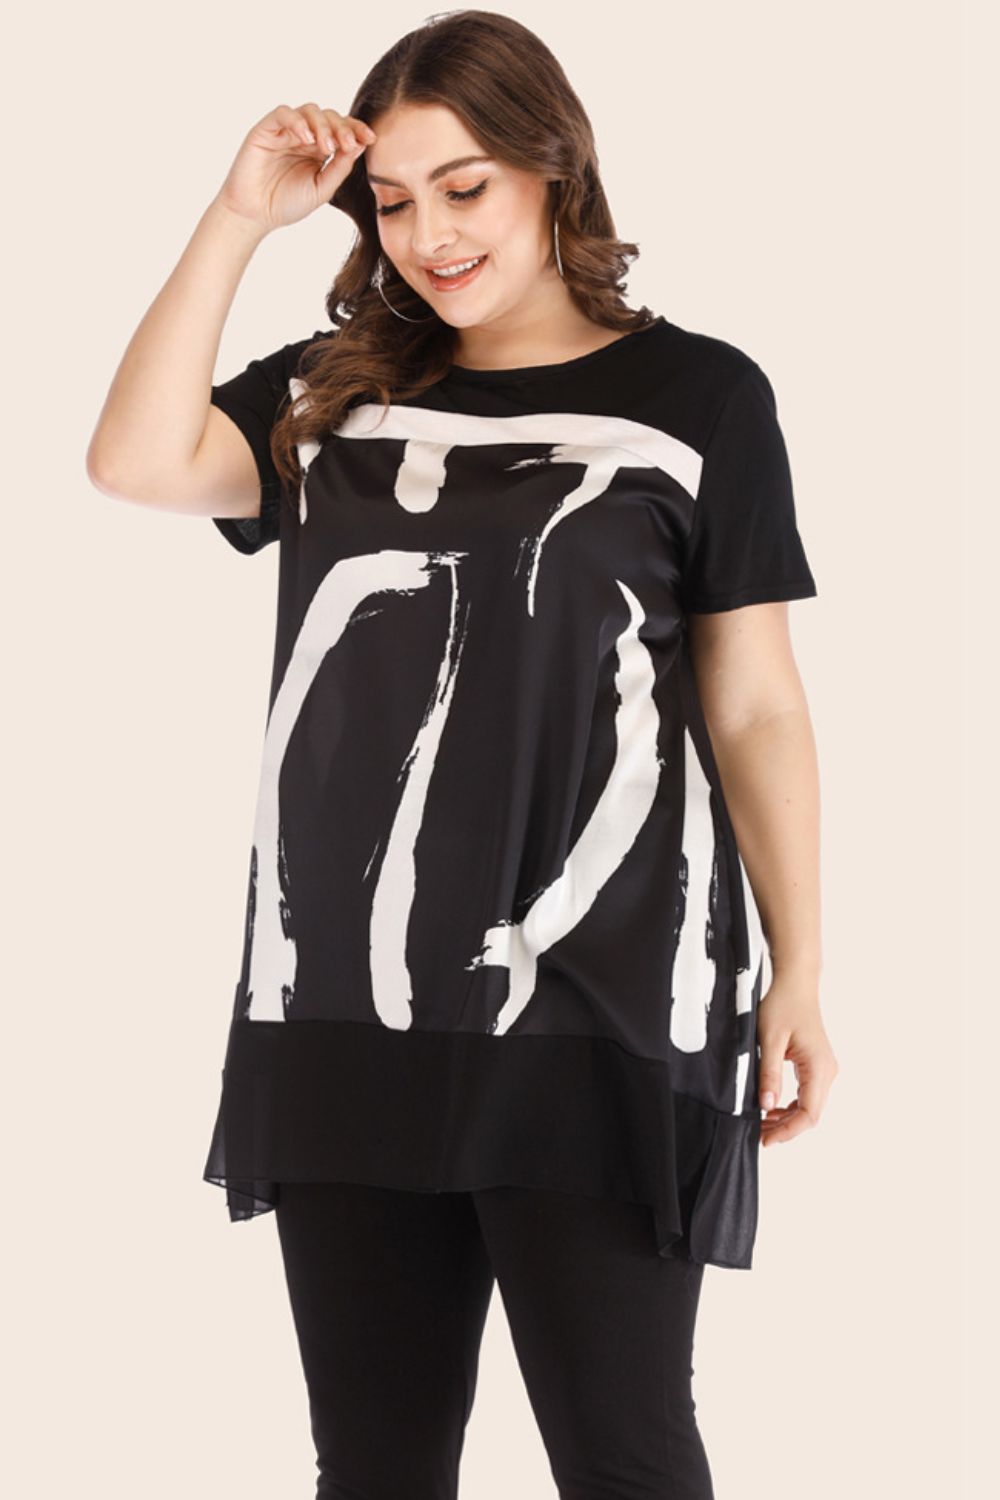 Plus Size Contrast Spliced Mesh T-Shirt and Cropped Leggings Set - Bit of Swank